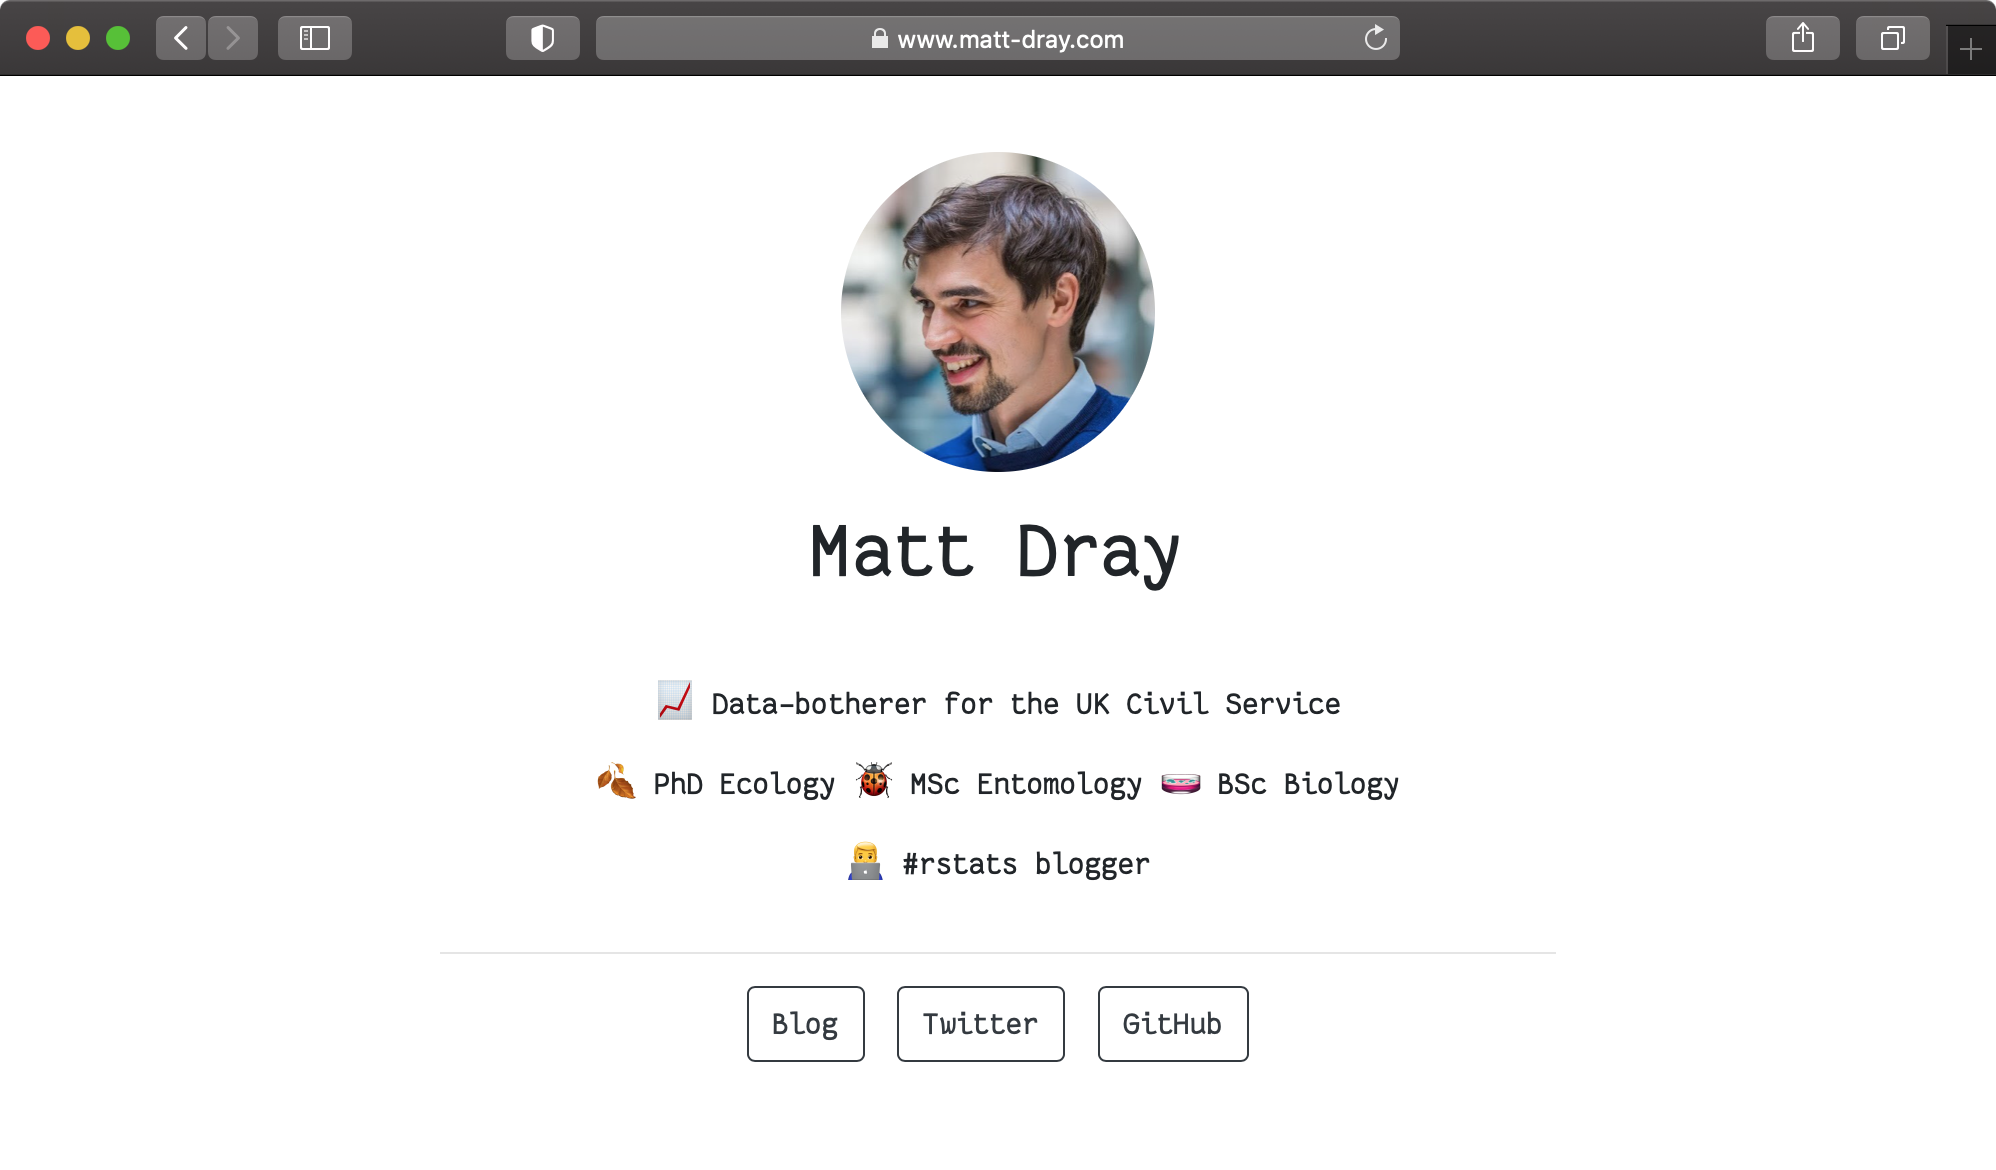 Screenshot of my personal webpage made with the postcards package by Sean Kross, showing a photo, name, short personal bio and buttons to my blog, Twitter and GitHub.